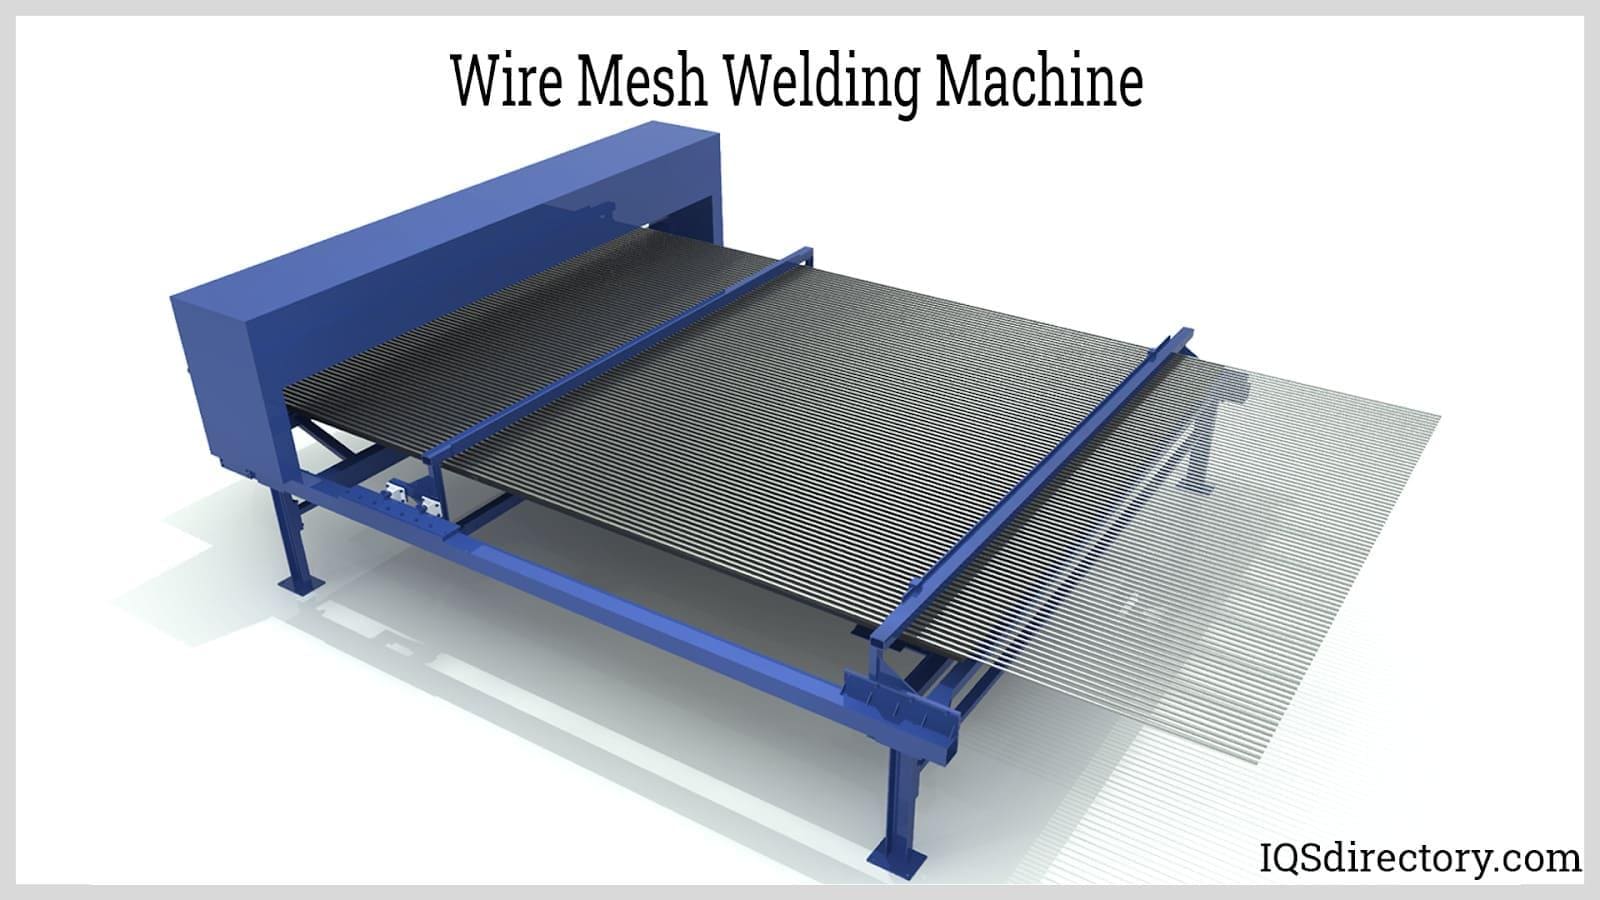 https://www.iqsdirectory.com/articles/wire-mesh/welded-wire-mesh/wire-mesh-welding-machine.jpg